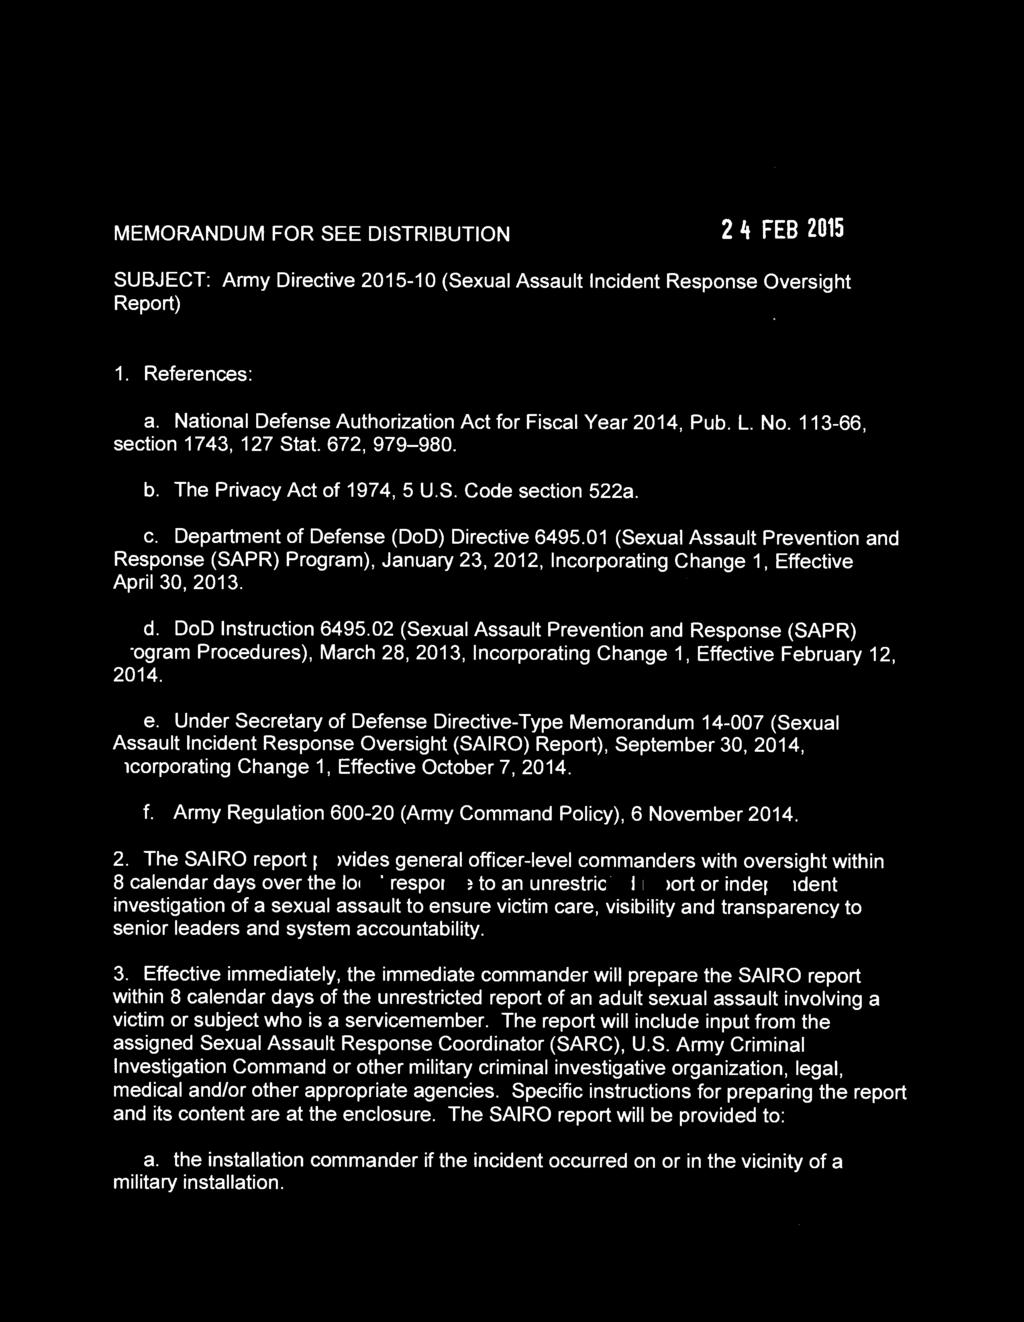 SECRETARY OF THE ARMY WASHINGTON MEMORANDUM FOR SEE DISTRIBUTION 2 4 FEB 2015 SUBJECT: Army Directive 2015-10 (Sexual Assault Incident Response Oversight Report) 1. References: a.